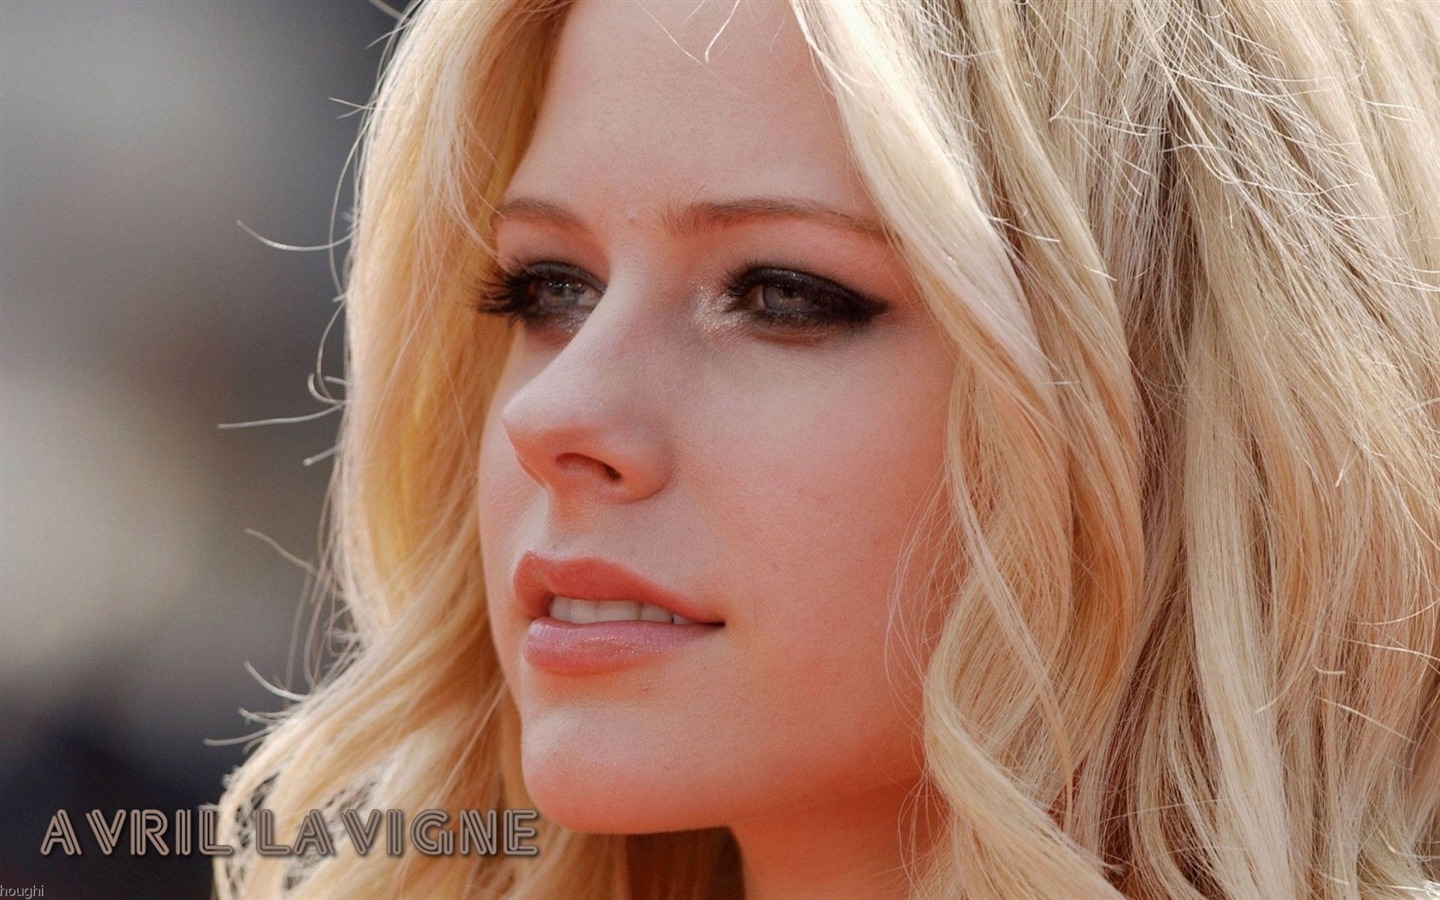 Avril Lavigne #094 - 1440x900 Wallpapers Pictures Photos Images